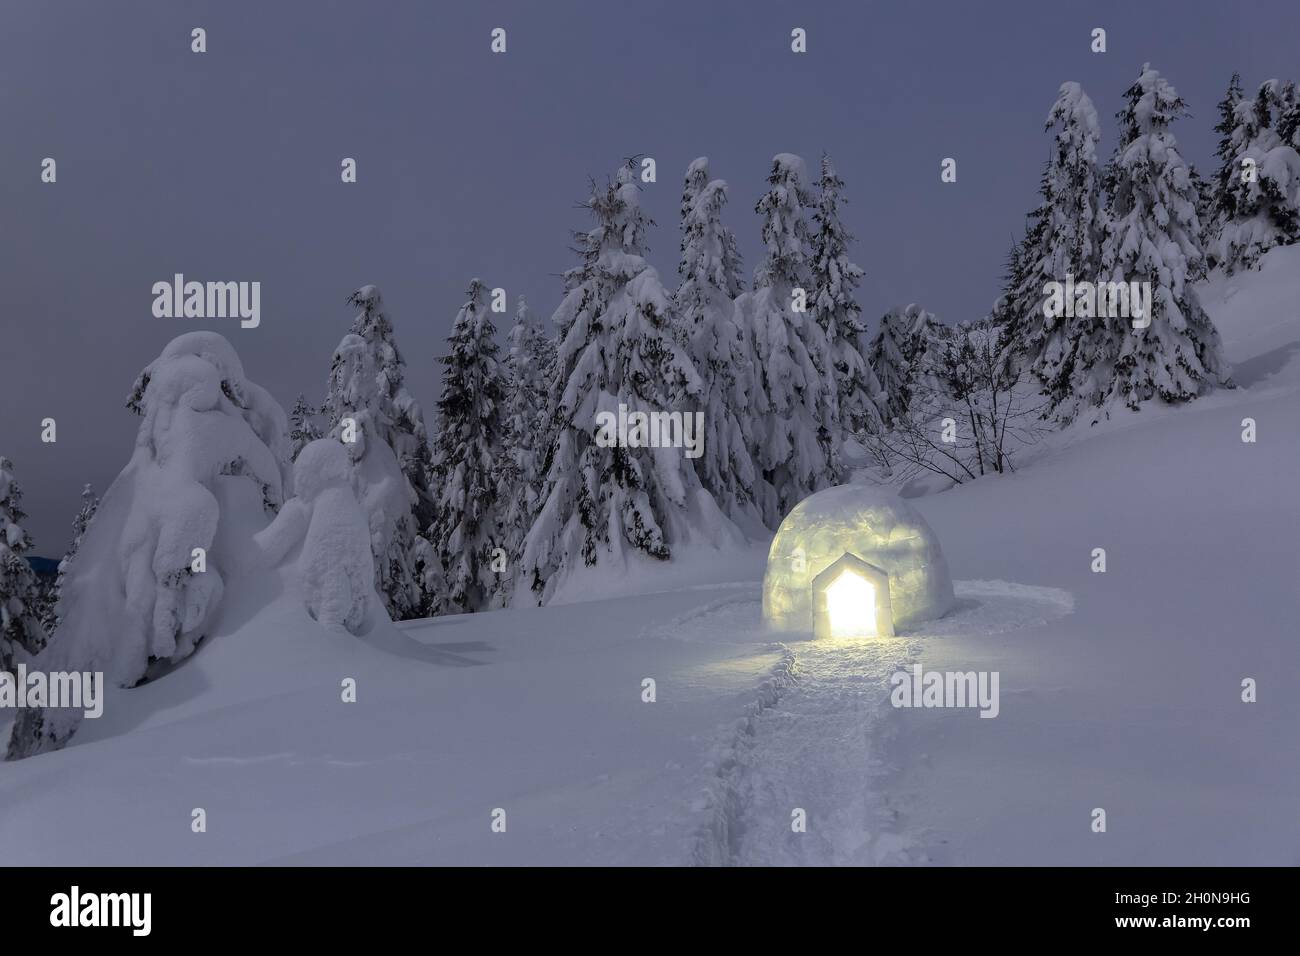 Night winter mountain landscapes. Igloo stands on the snowy lawn. House with light. Location place the Carpathian Mountains, Ukraine, Europe. Stock Photo